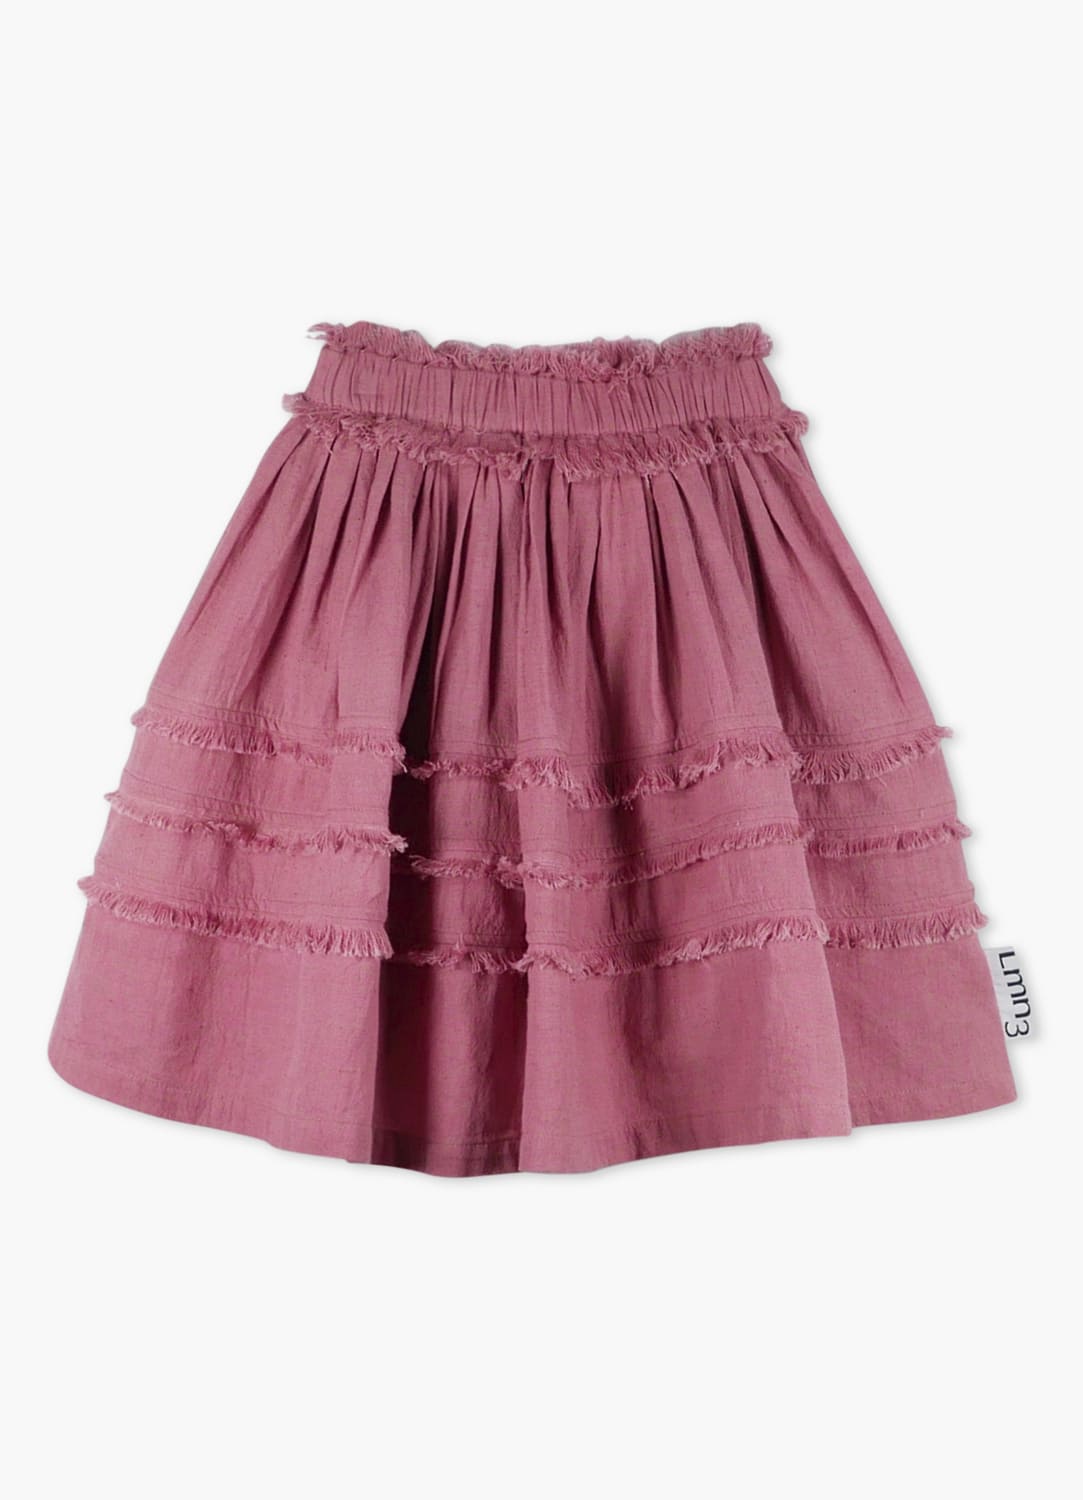 Lmn3 Ruffle Skirt - Withered Rose